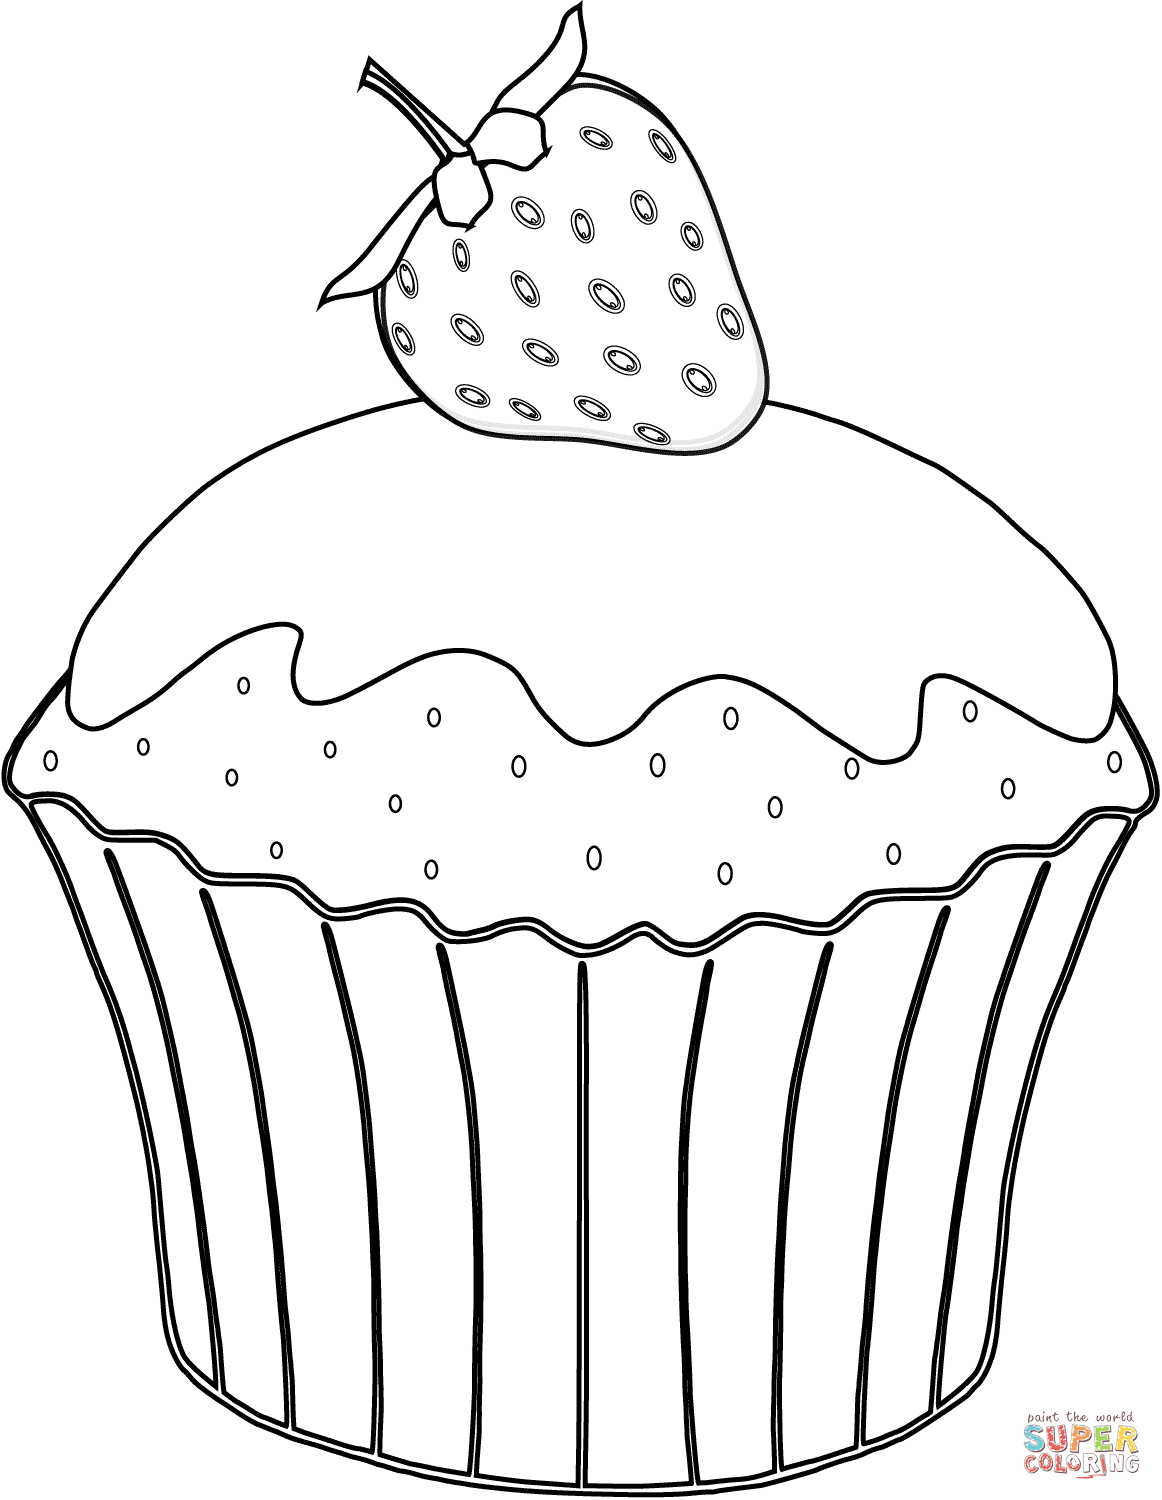 Muffin with Strawberry coloring page | Free Printable Coloring Pages